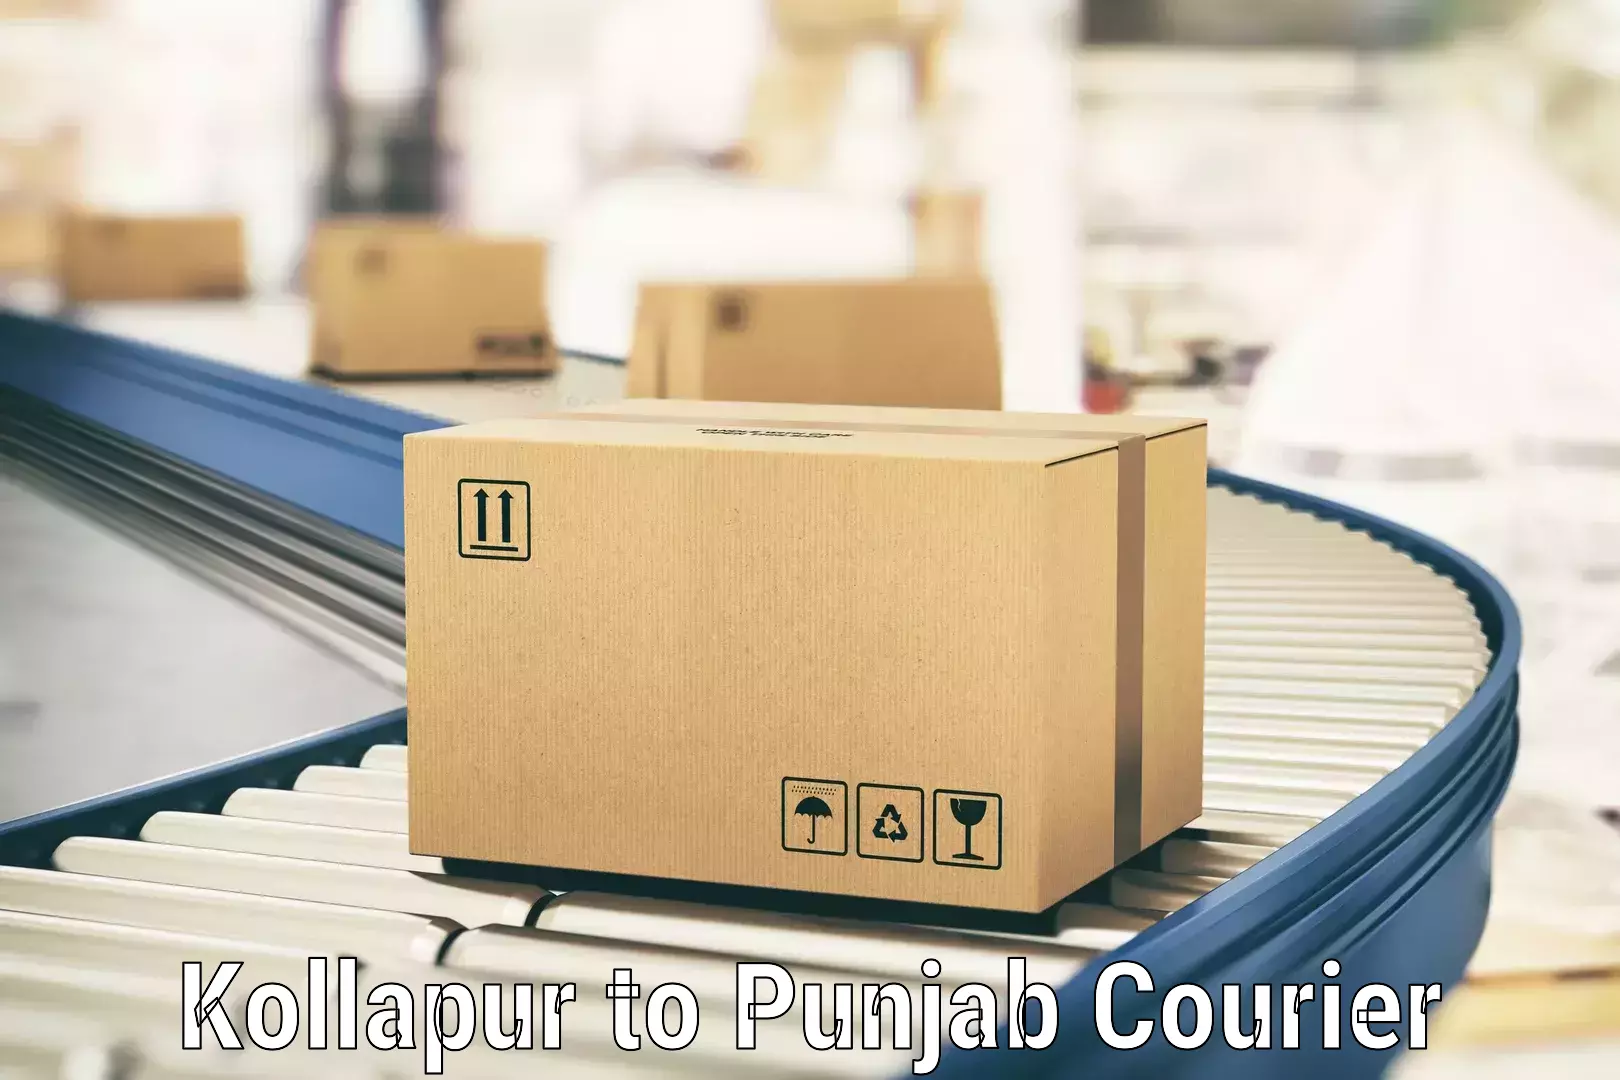 Nationwide delivery network in Kollapur to Central University of Punjab Bathinda